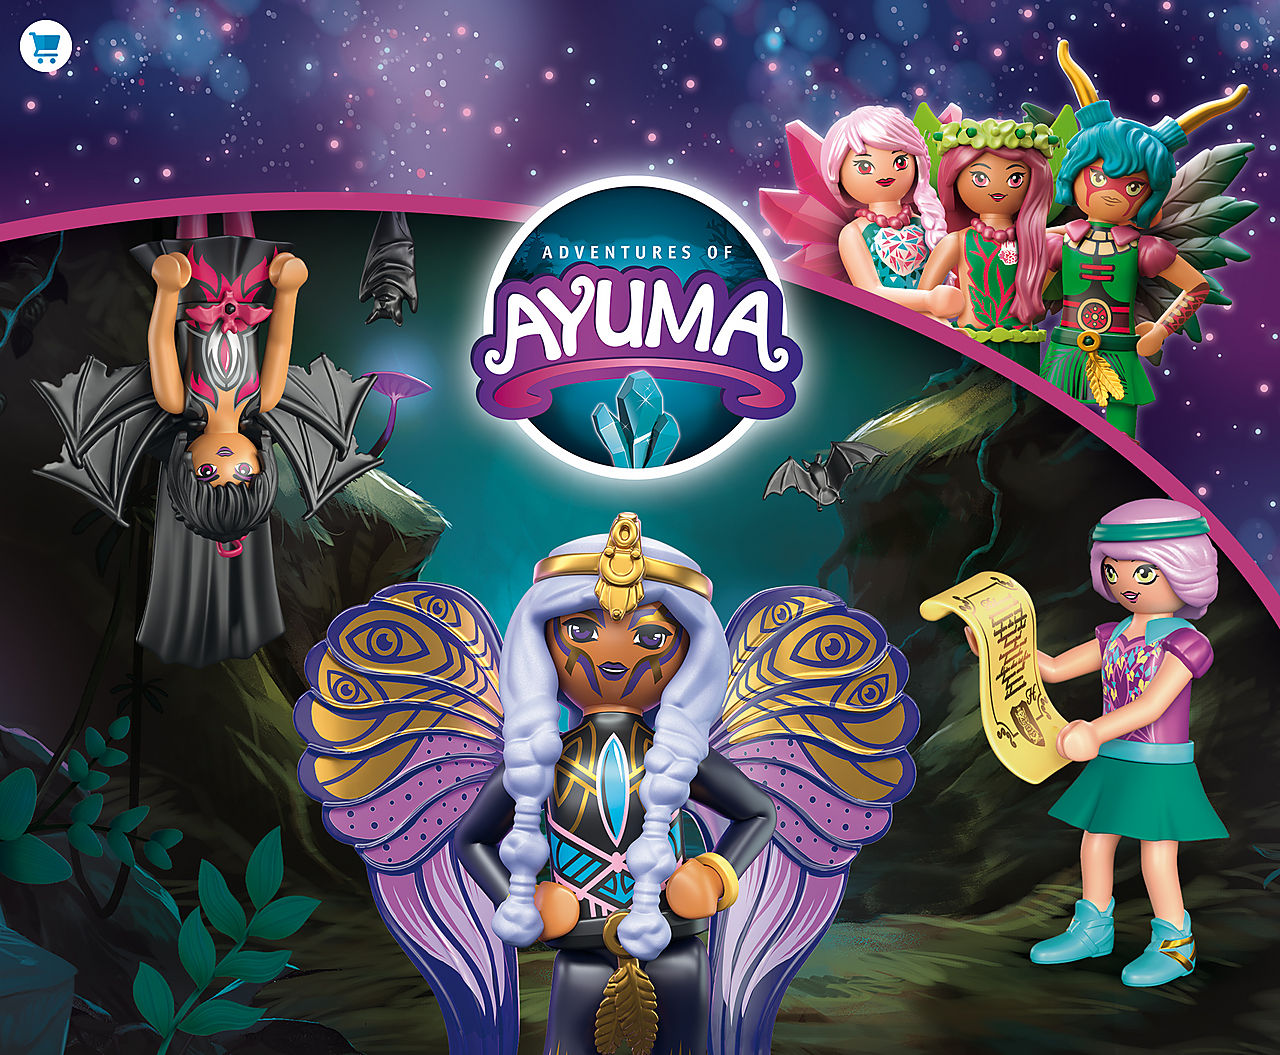 The fairy adventure continues - discover the new Adventures of Ayuma playsets like 70807 Bat Fairy Ruins